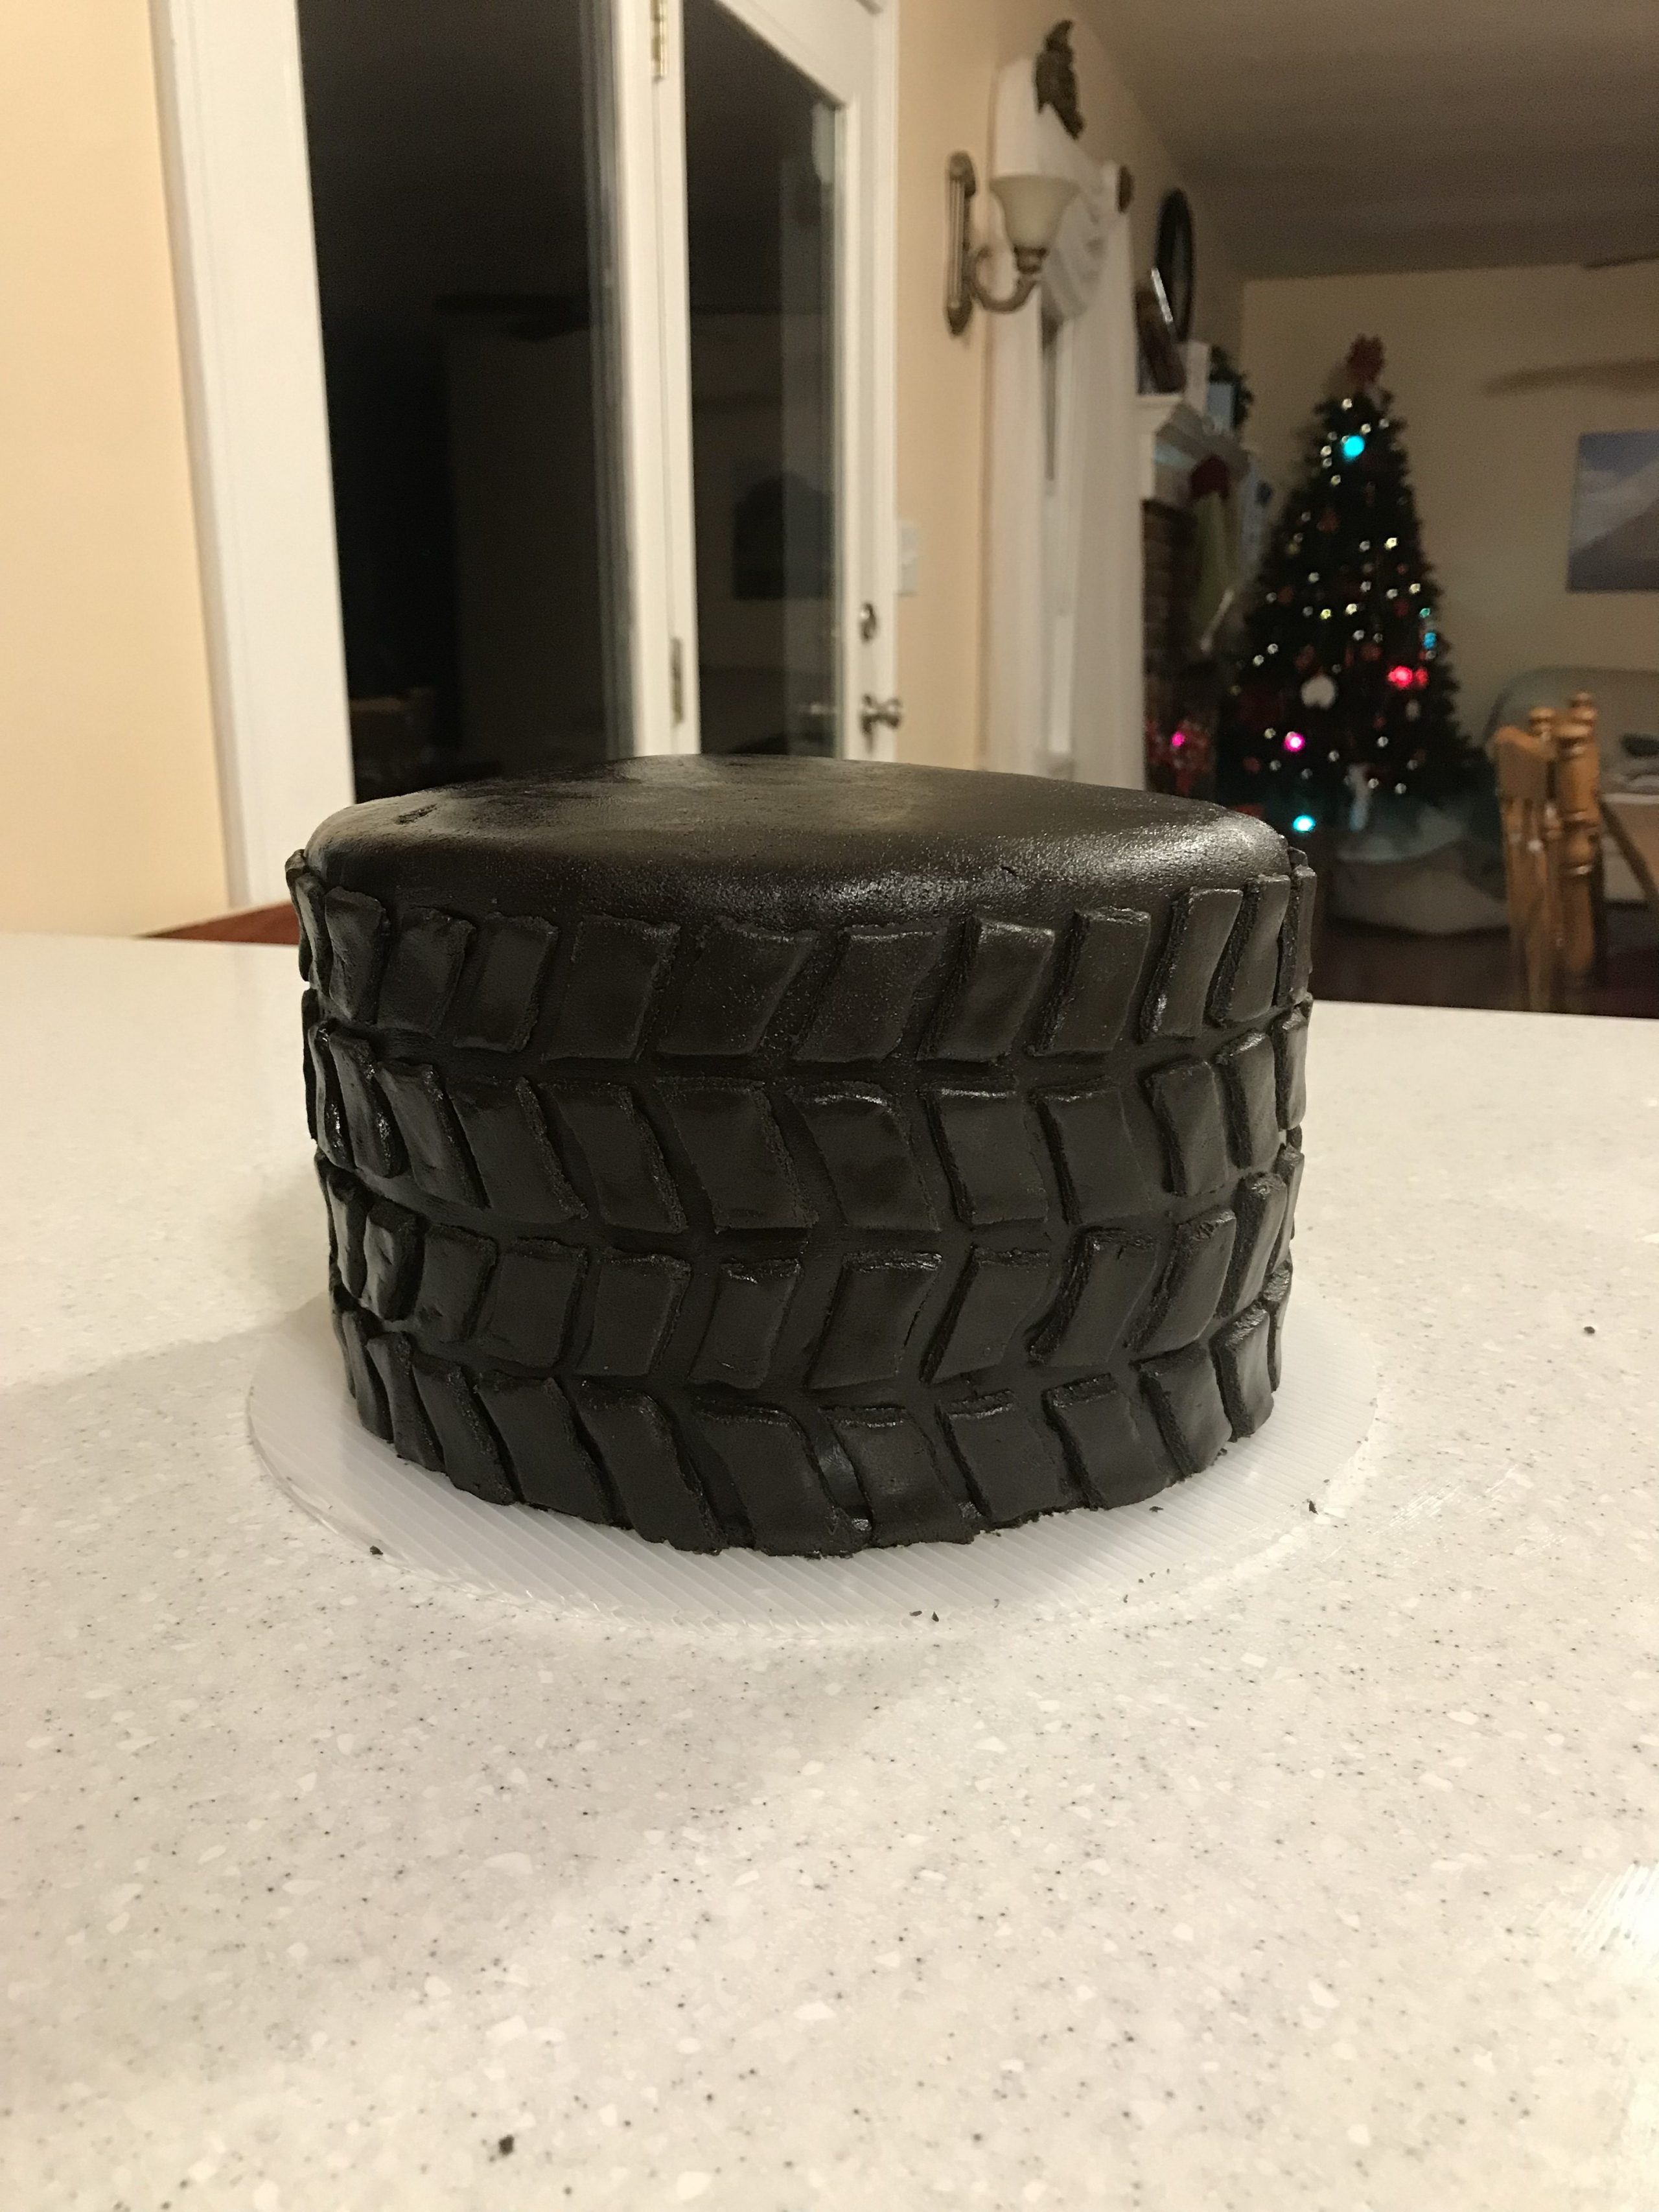 Allen's Tire Birthday Cake | Learn how to decorate a cake using only gluten free ingredients. I made this vanilla cake decorated in a tire tread pattern for my son's first birthday. | eatsomethingdelicious.com